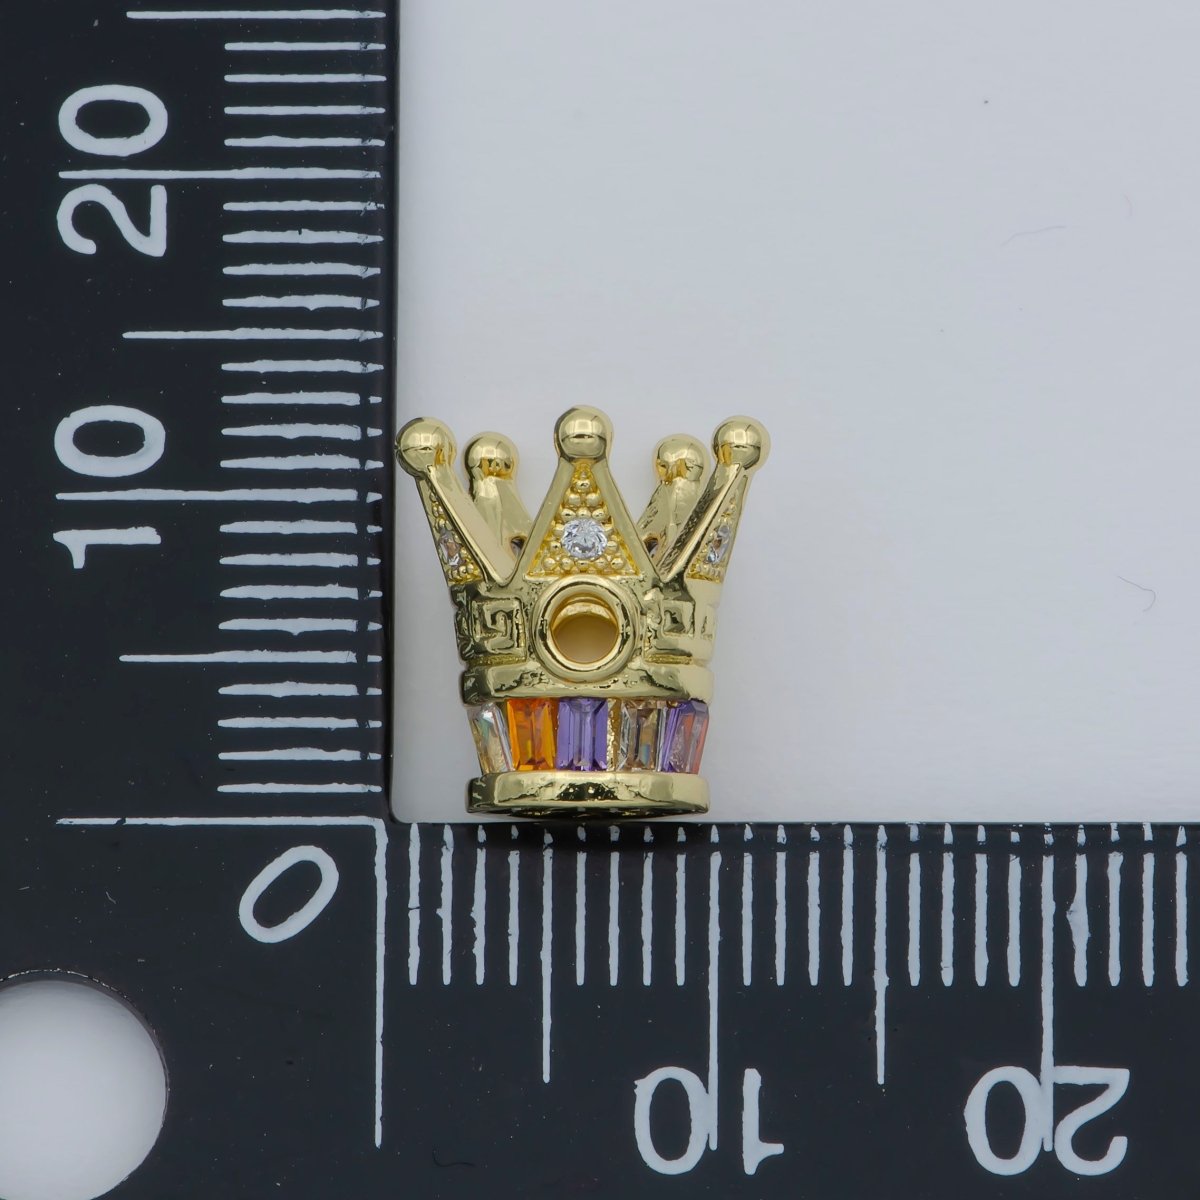 Tiny Gold Black Kingdom Emperor Crown Beads CZ Crystal Small King Queen Prince Crown Model Jewelry Making Beads B-568 to B-571 - DLUXCA